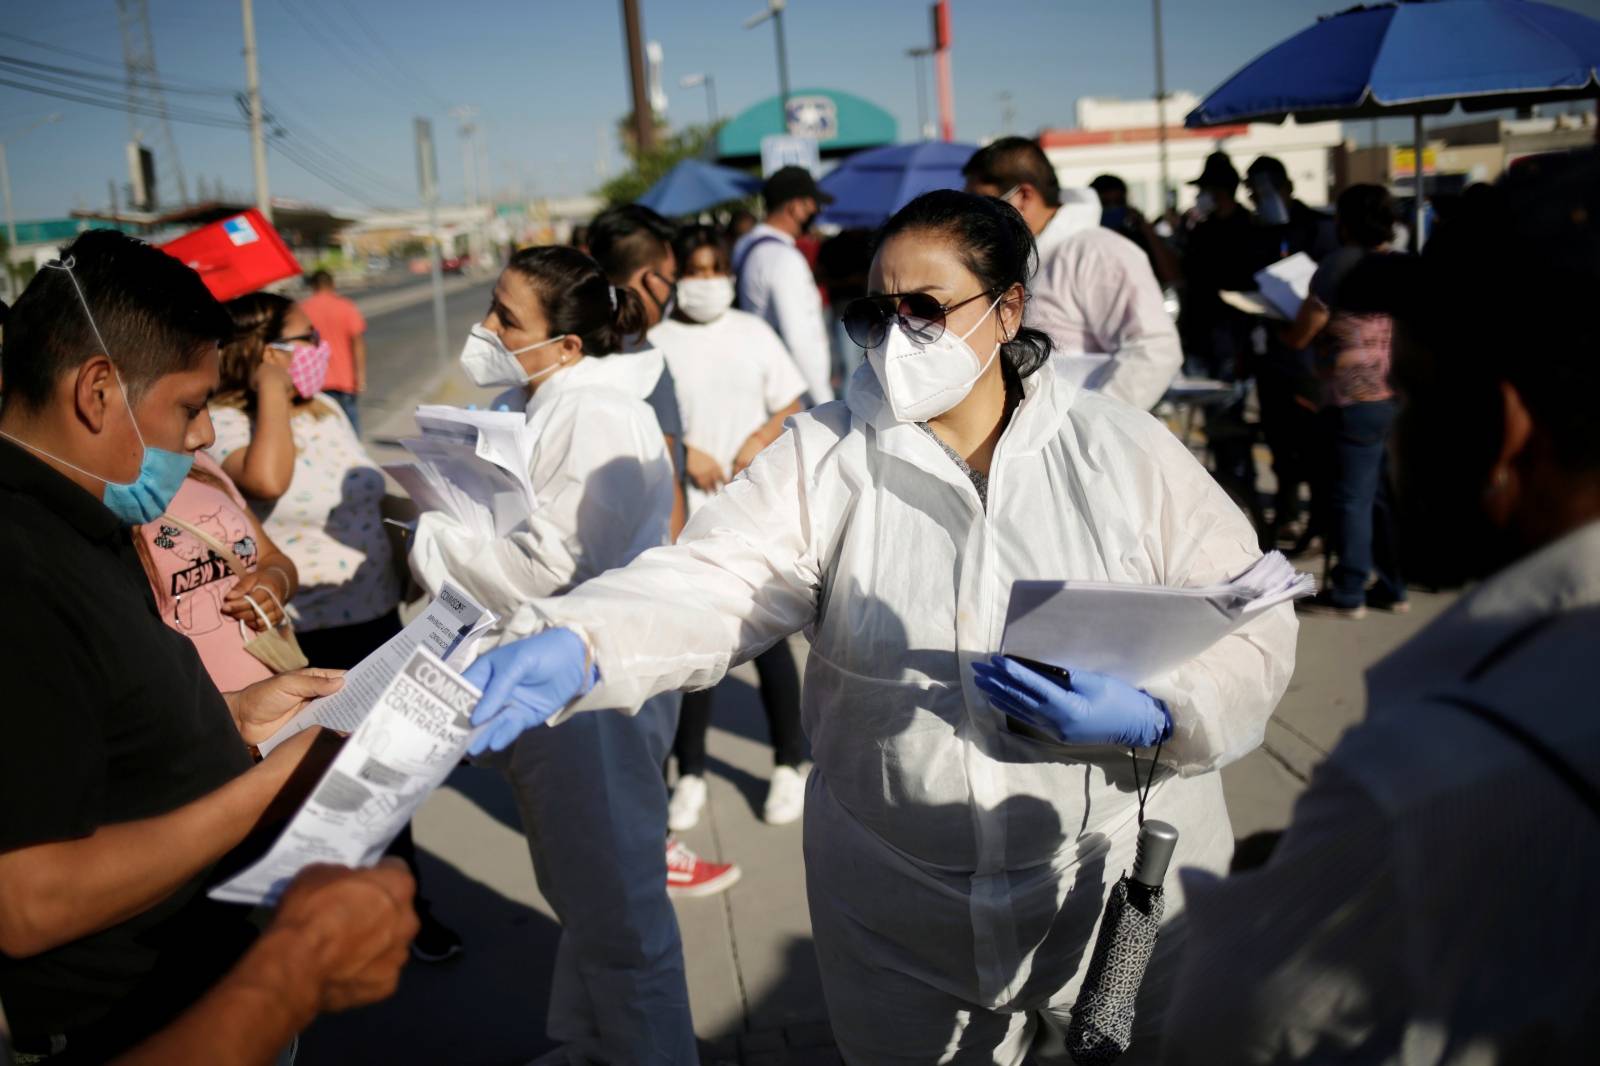 Personnel of an assembly factory, in protective gear, hands out job application forms to job seekers as the coronavirus disease (COVID-19) outbreak continues in Ciudad Juarez